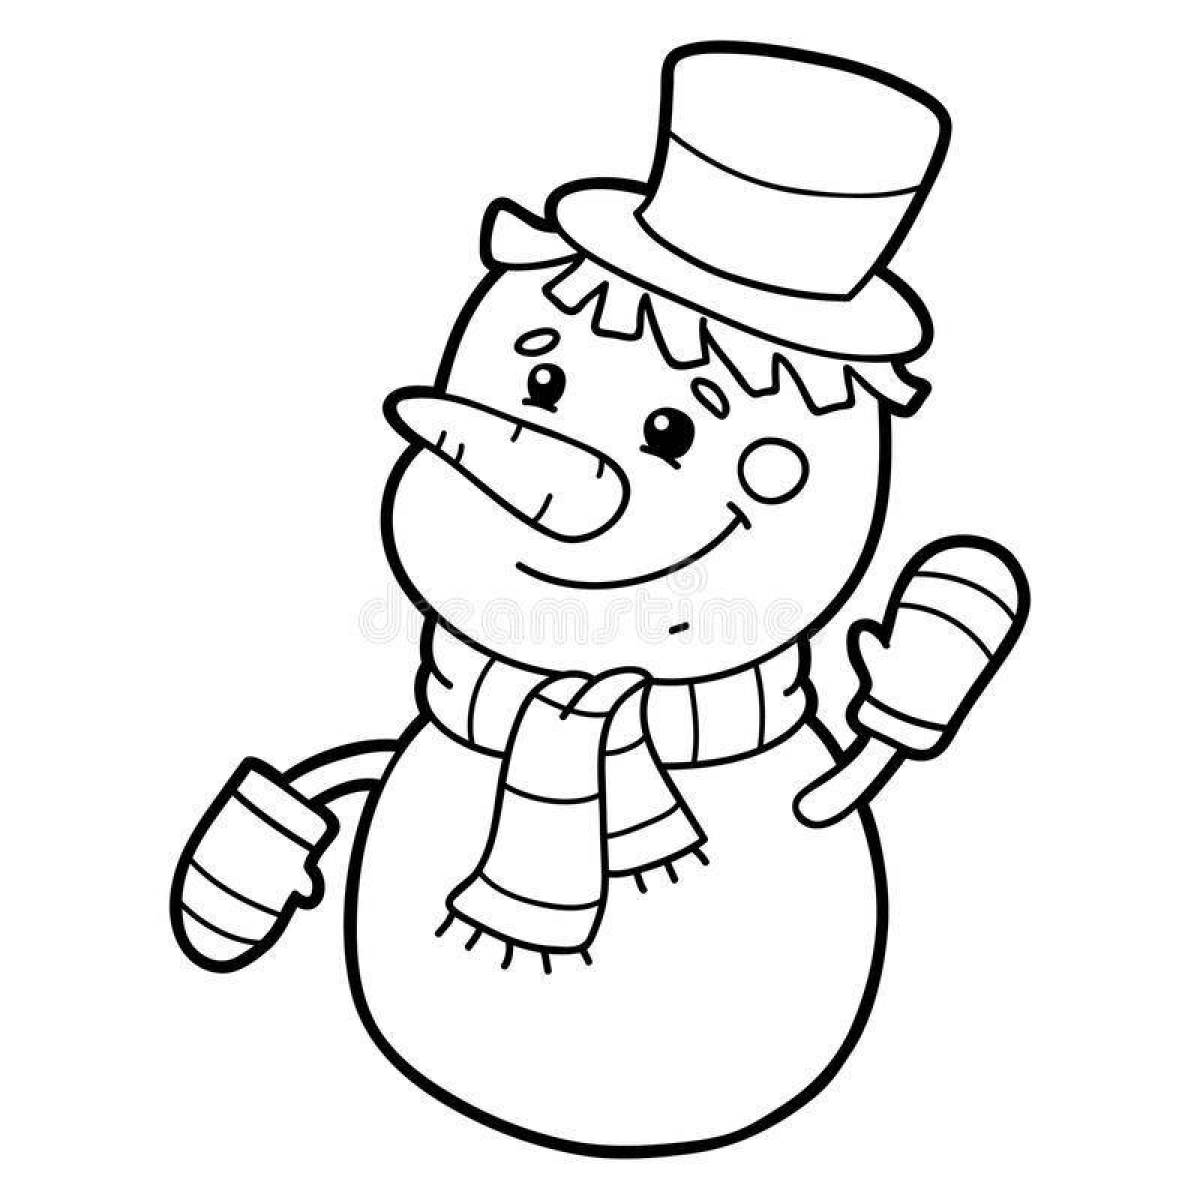 Fun coloring snowman by numbers